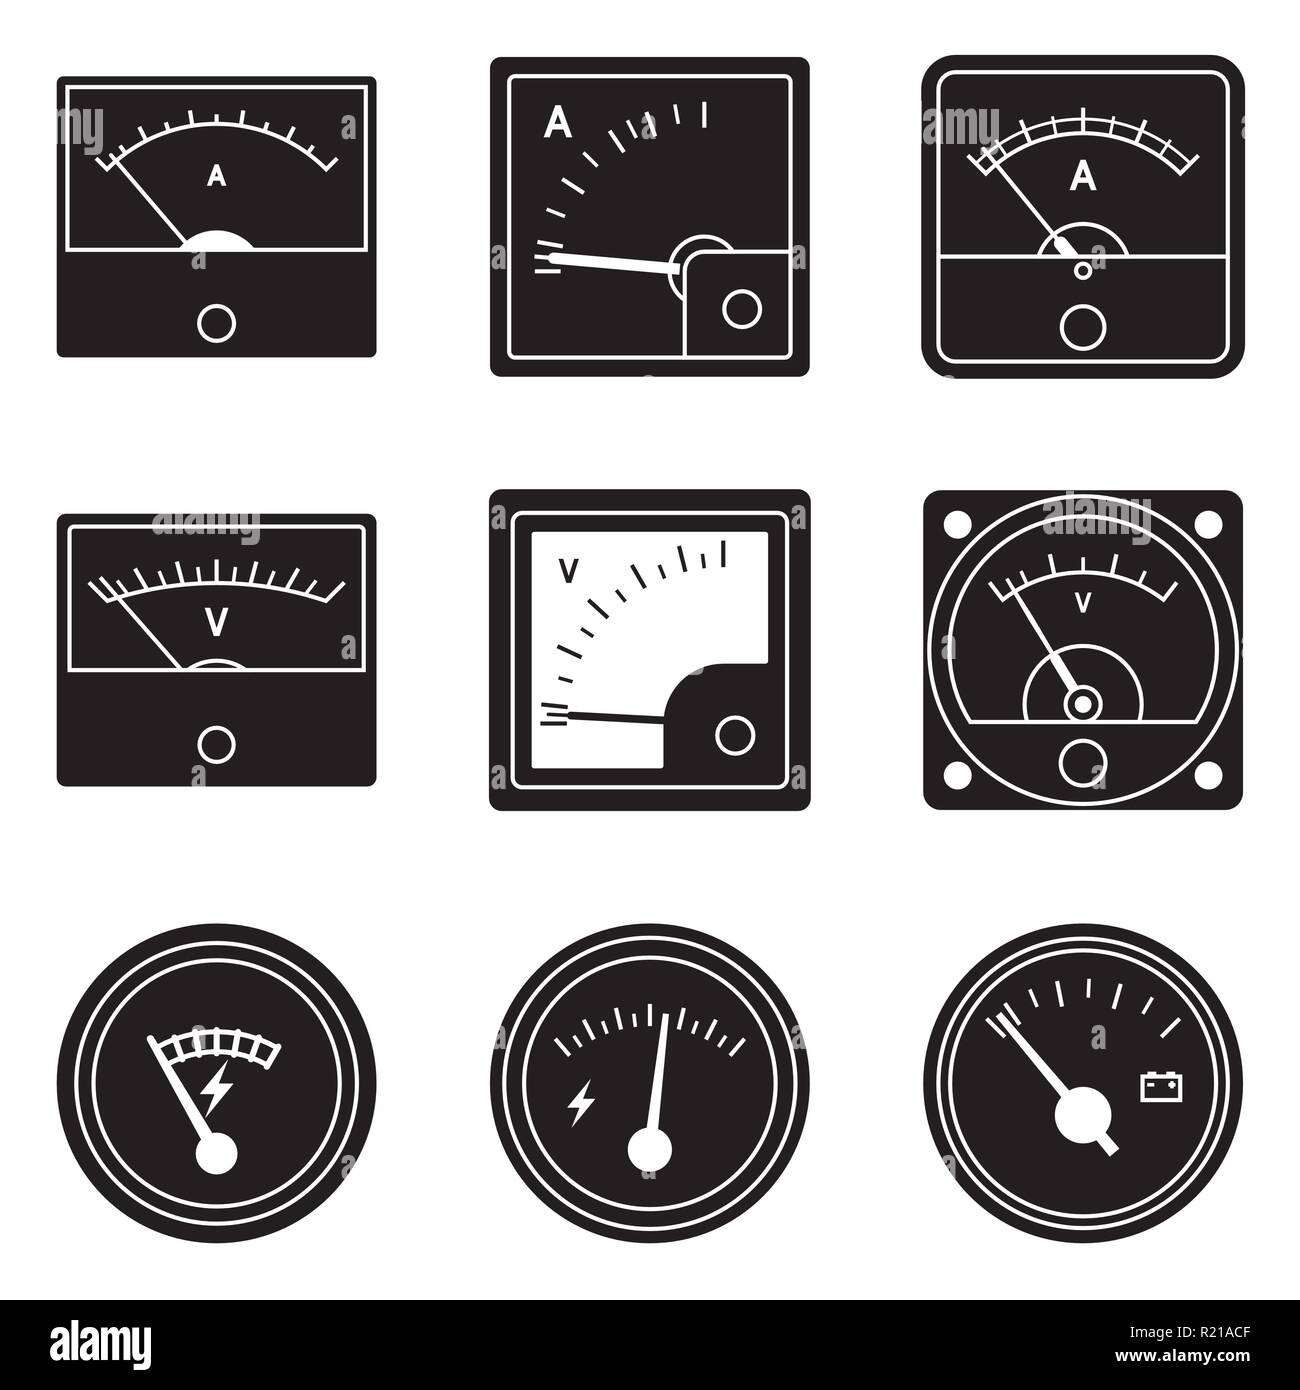 Voltmeter Stock Vector Images - Alamy